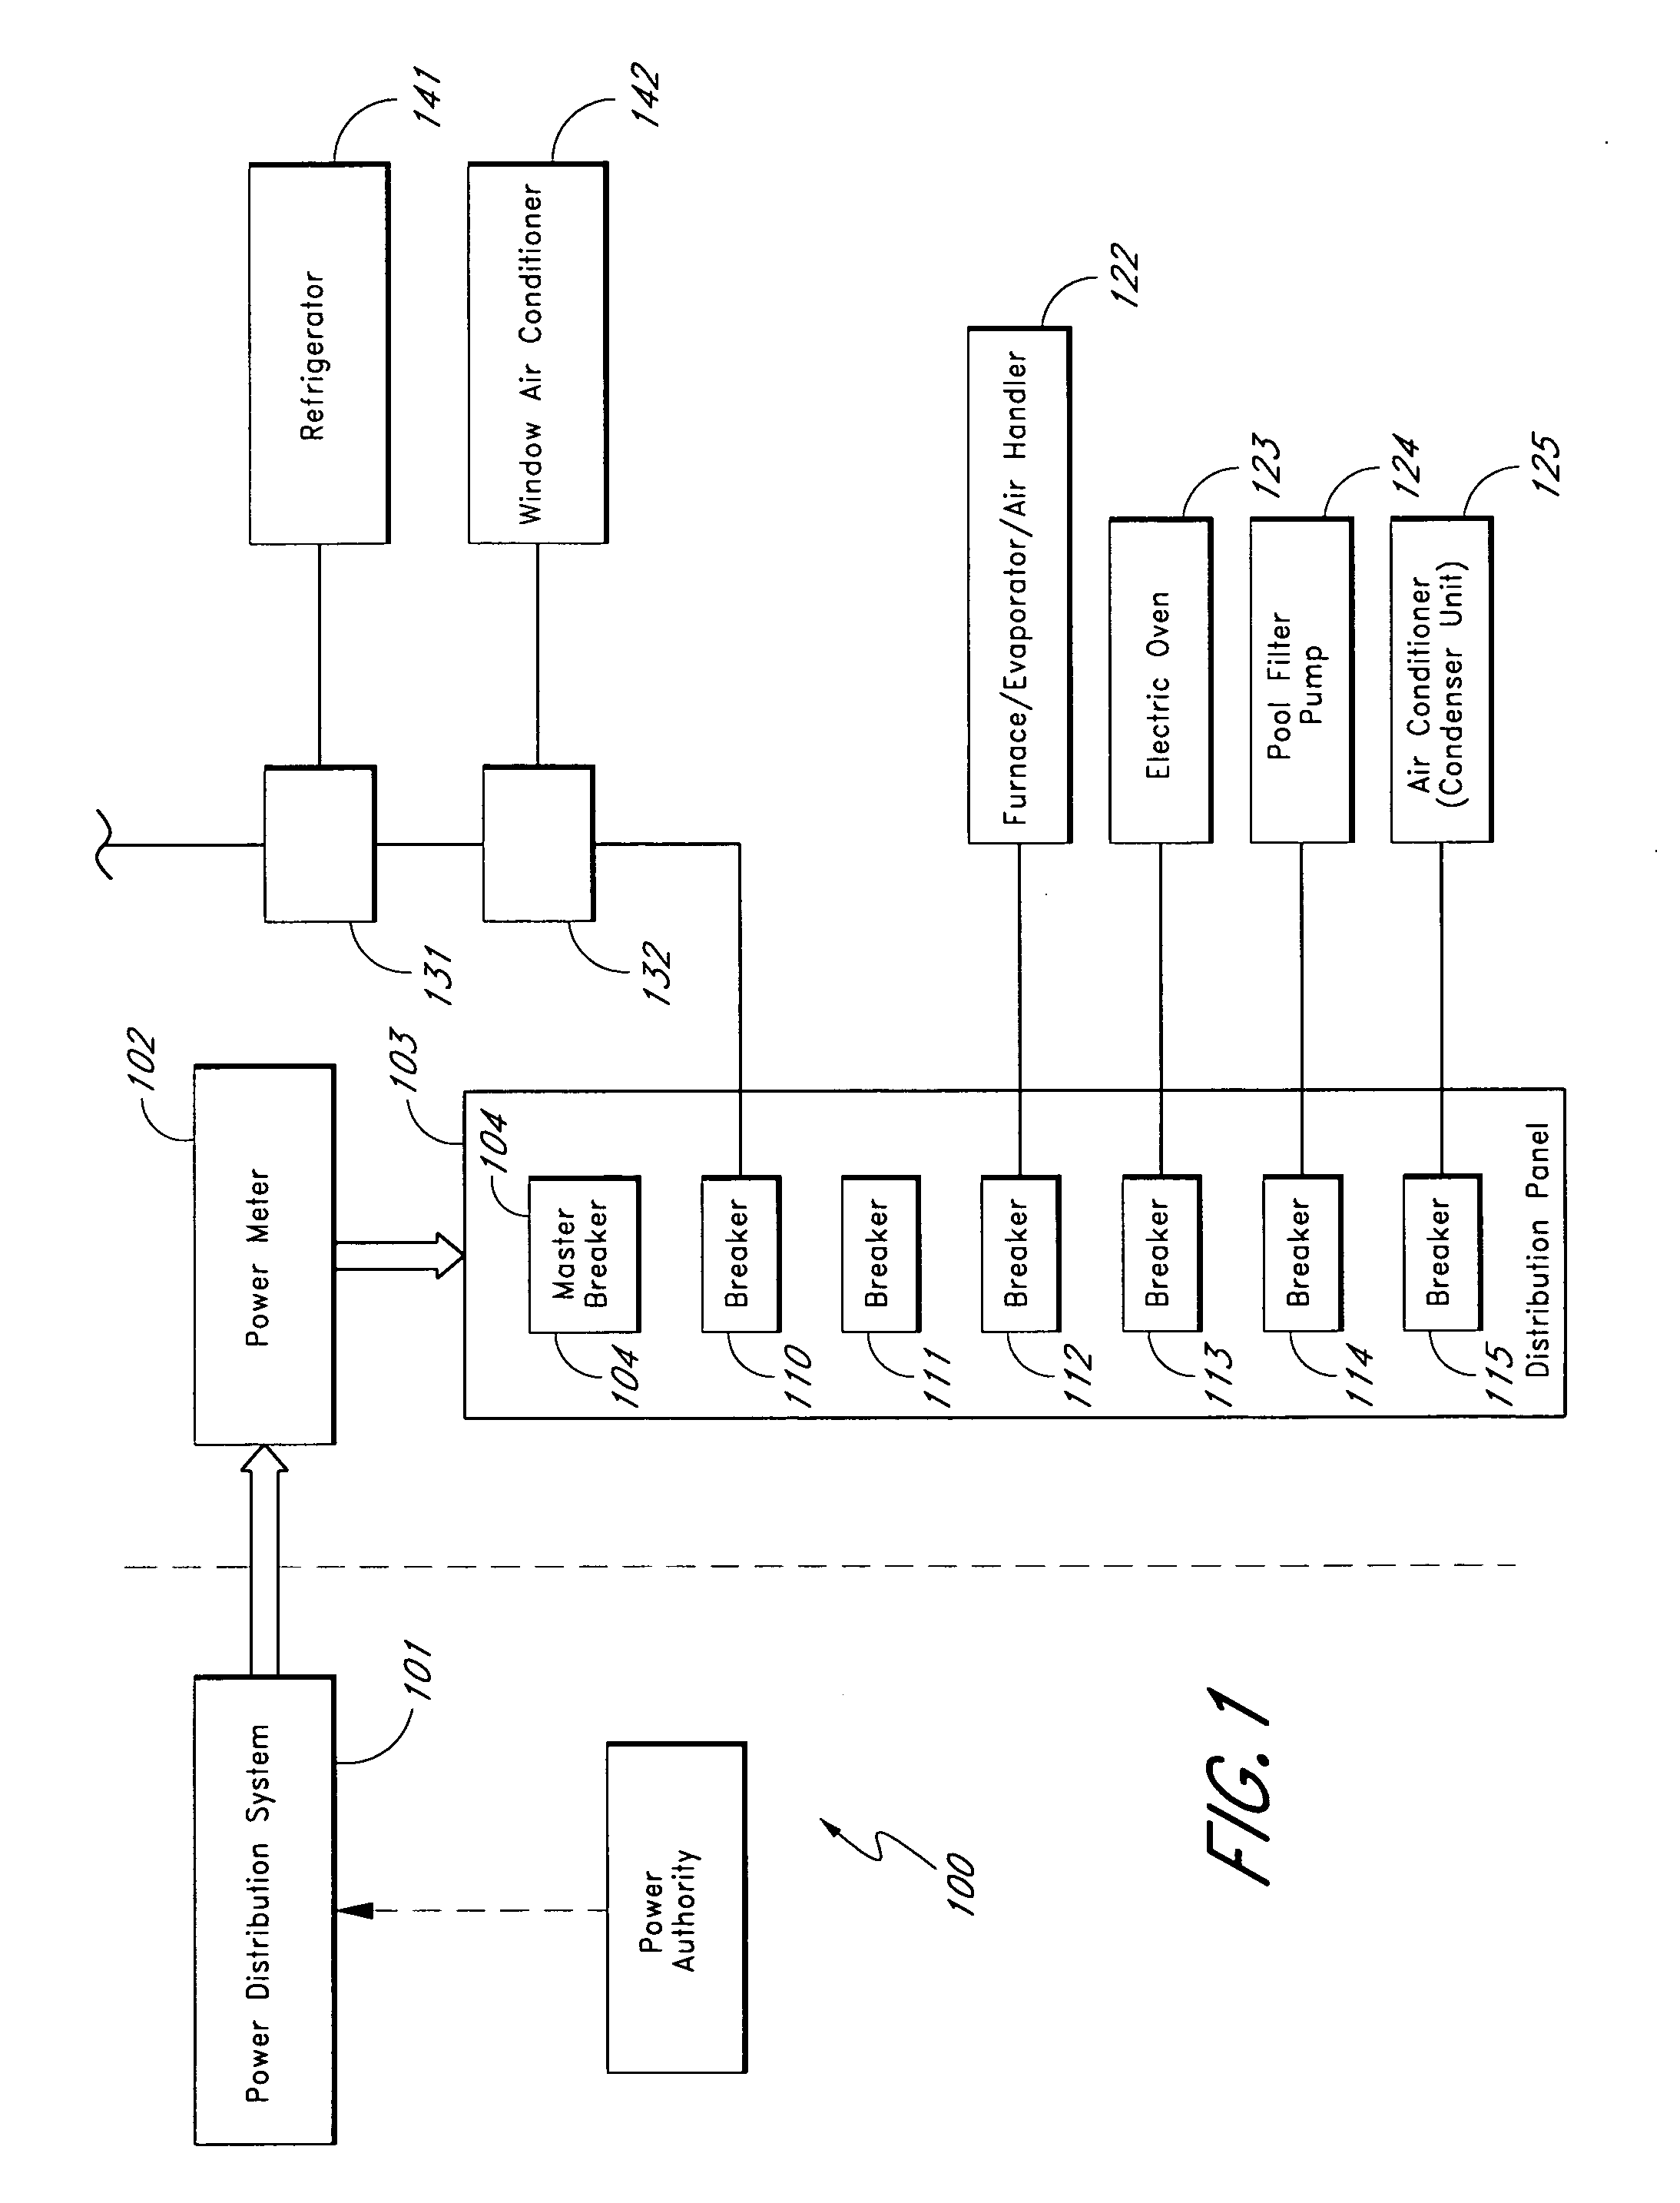 Method and apparatus for load management in an electric power system